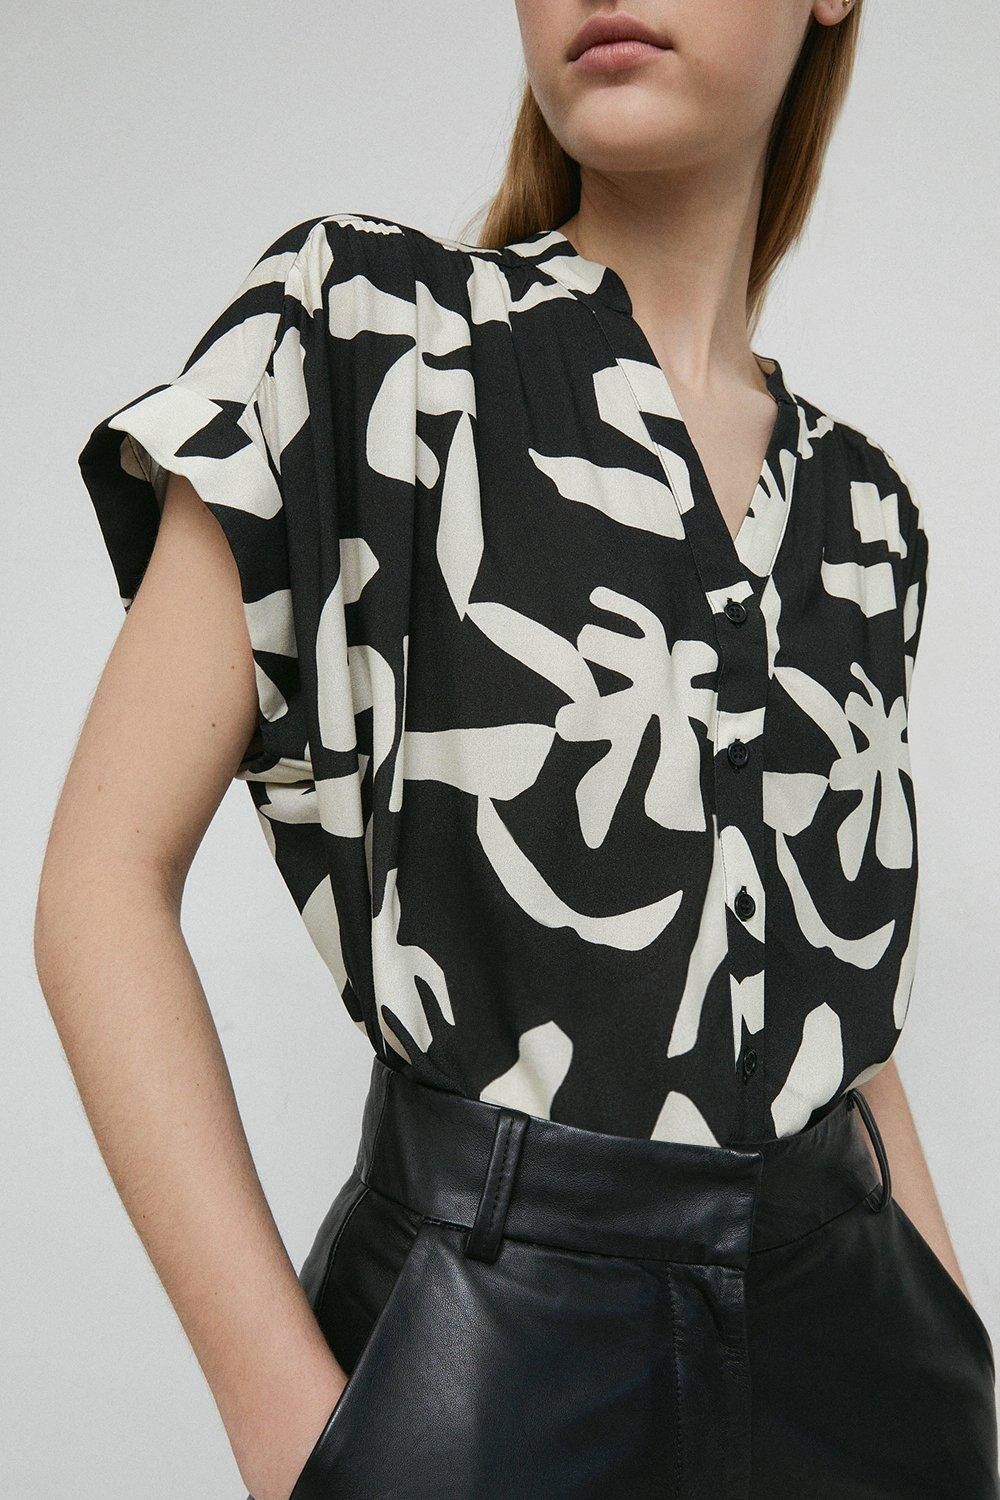 Printed Blouses: Adding Personality to Your Wardrobe